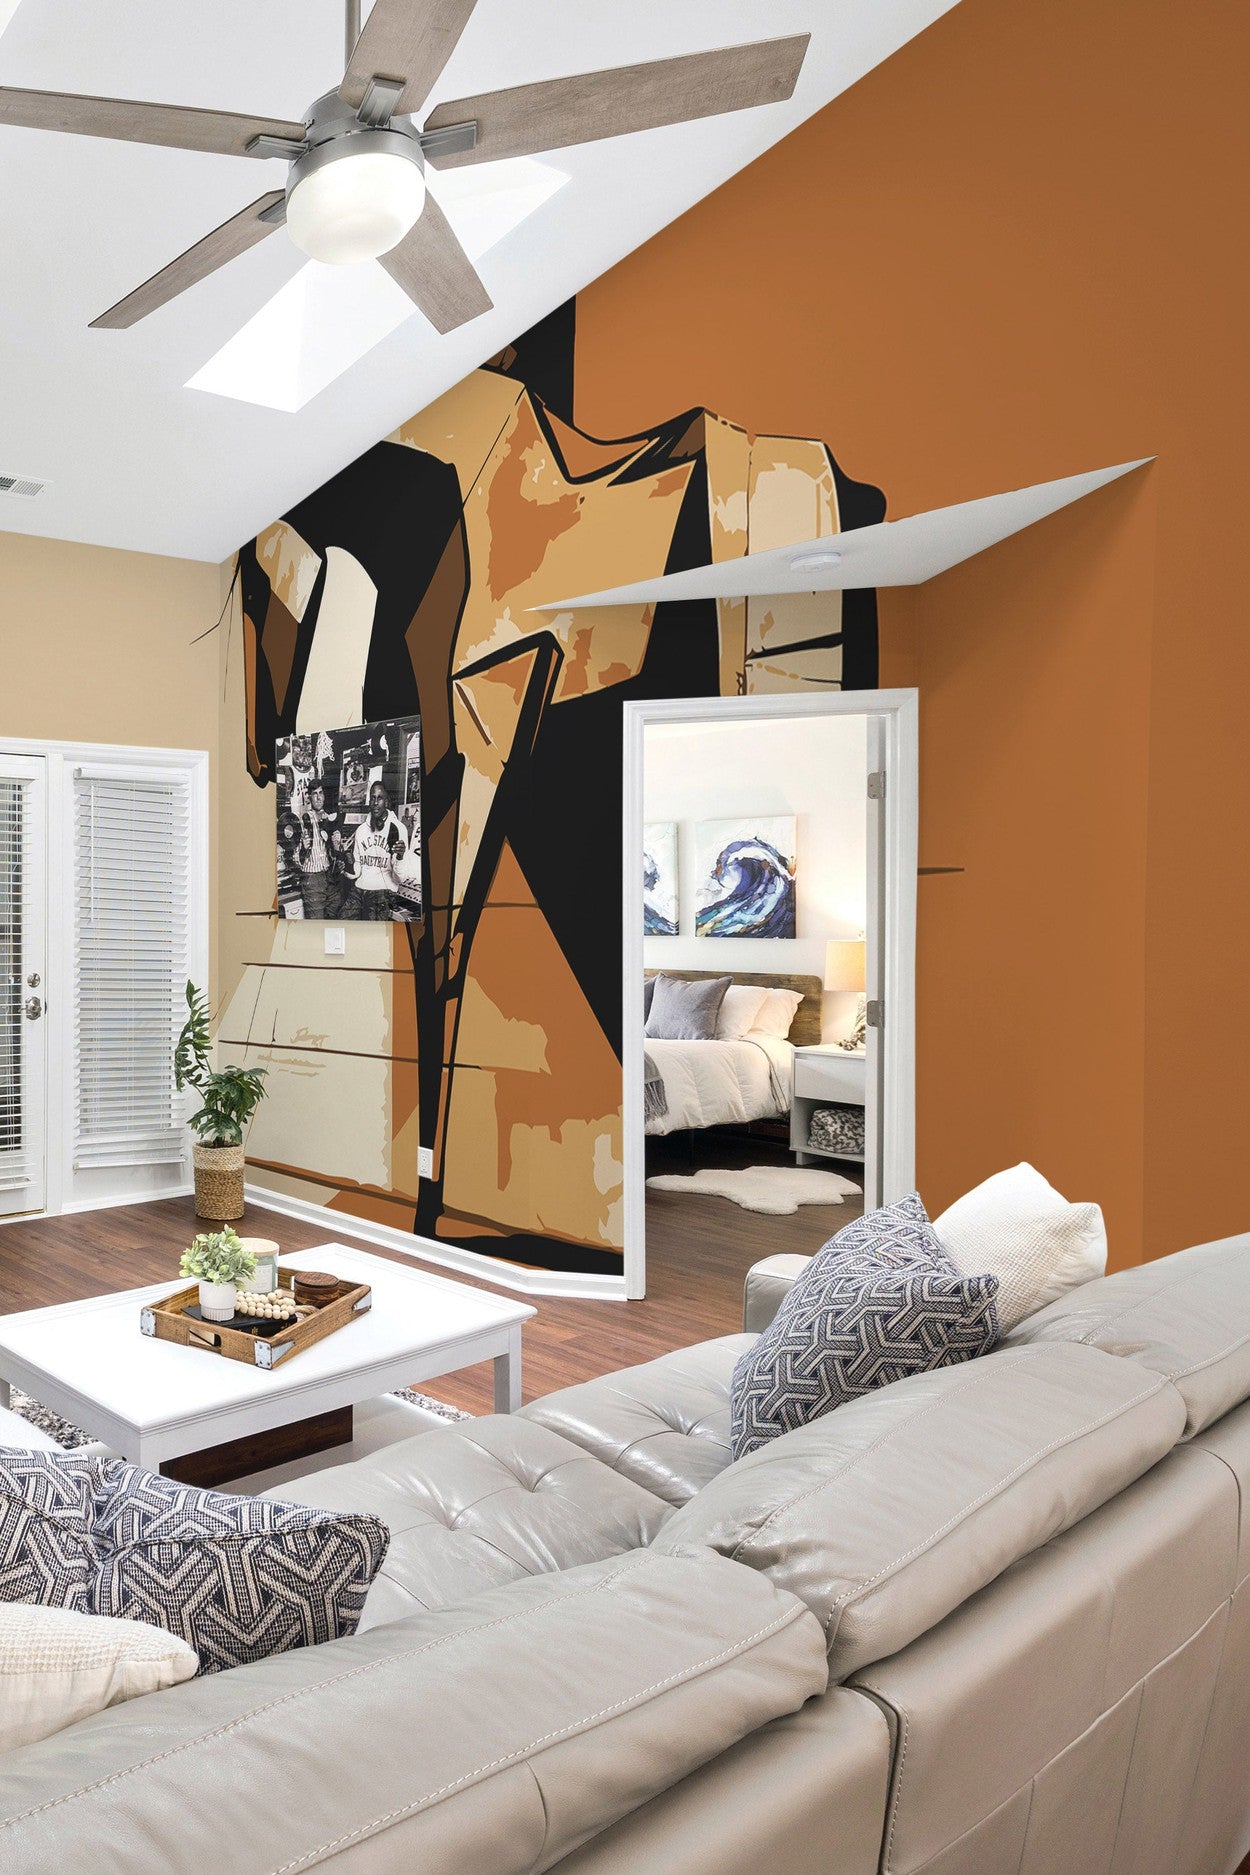 A contemporary living room featuring an oversized wall mural of a rhinoceros above a white sofa, with a warm orange wall and a ceiling fan.